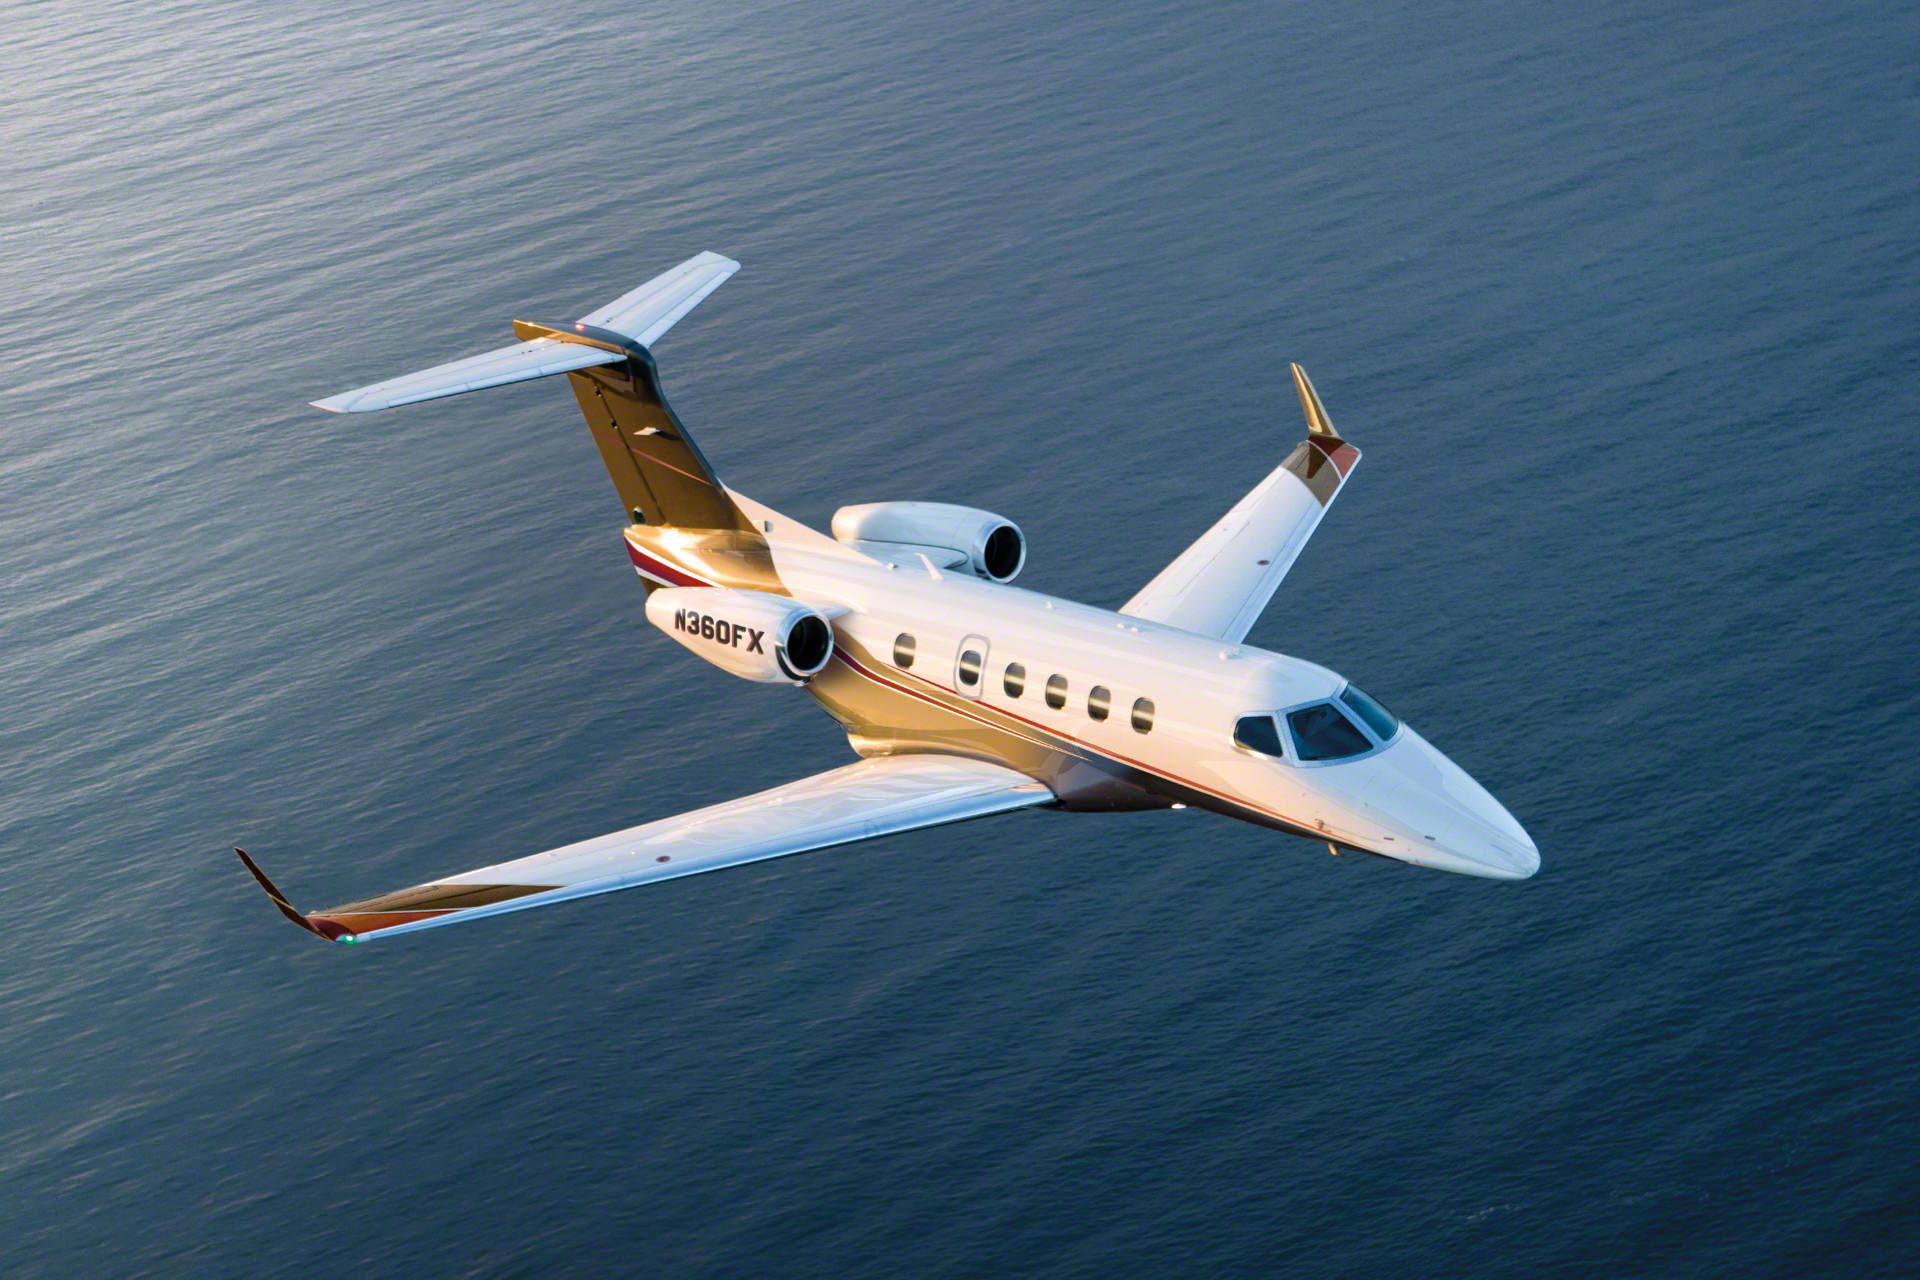 Phenom 300 the world's best-selling light jet of Embraer aircraft manufacturer